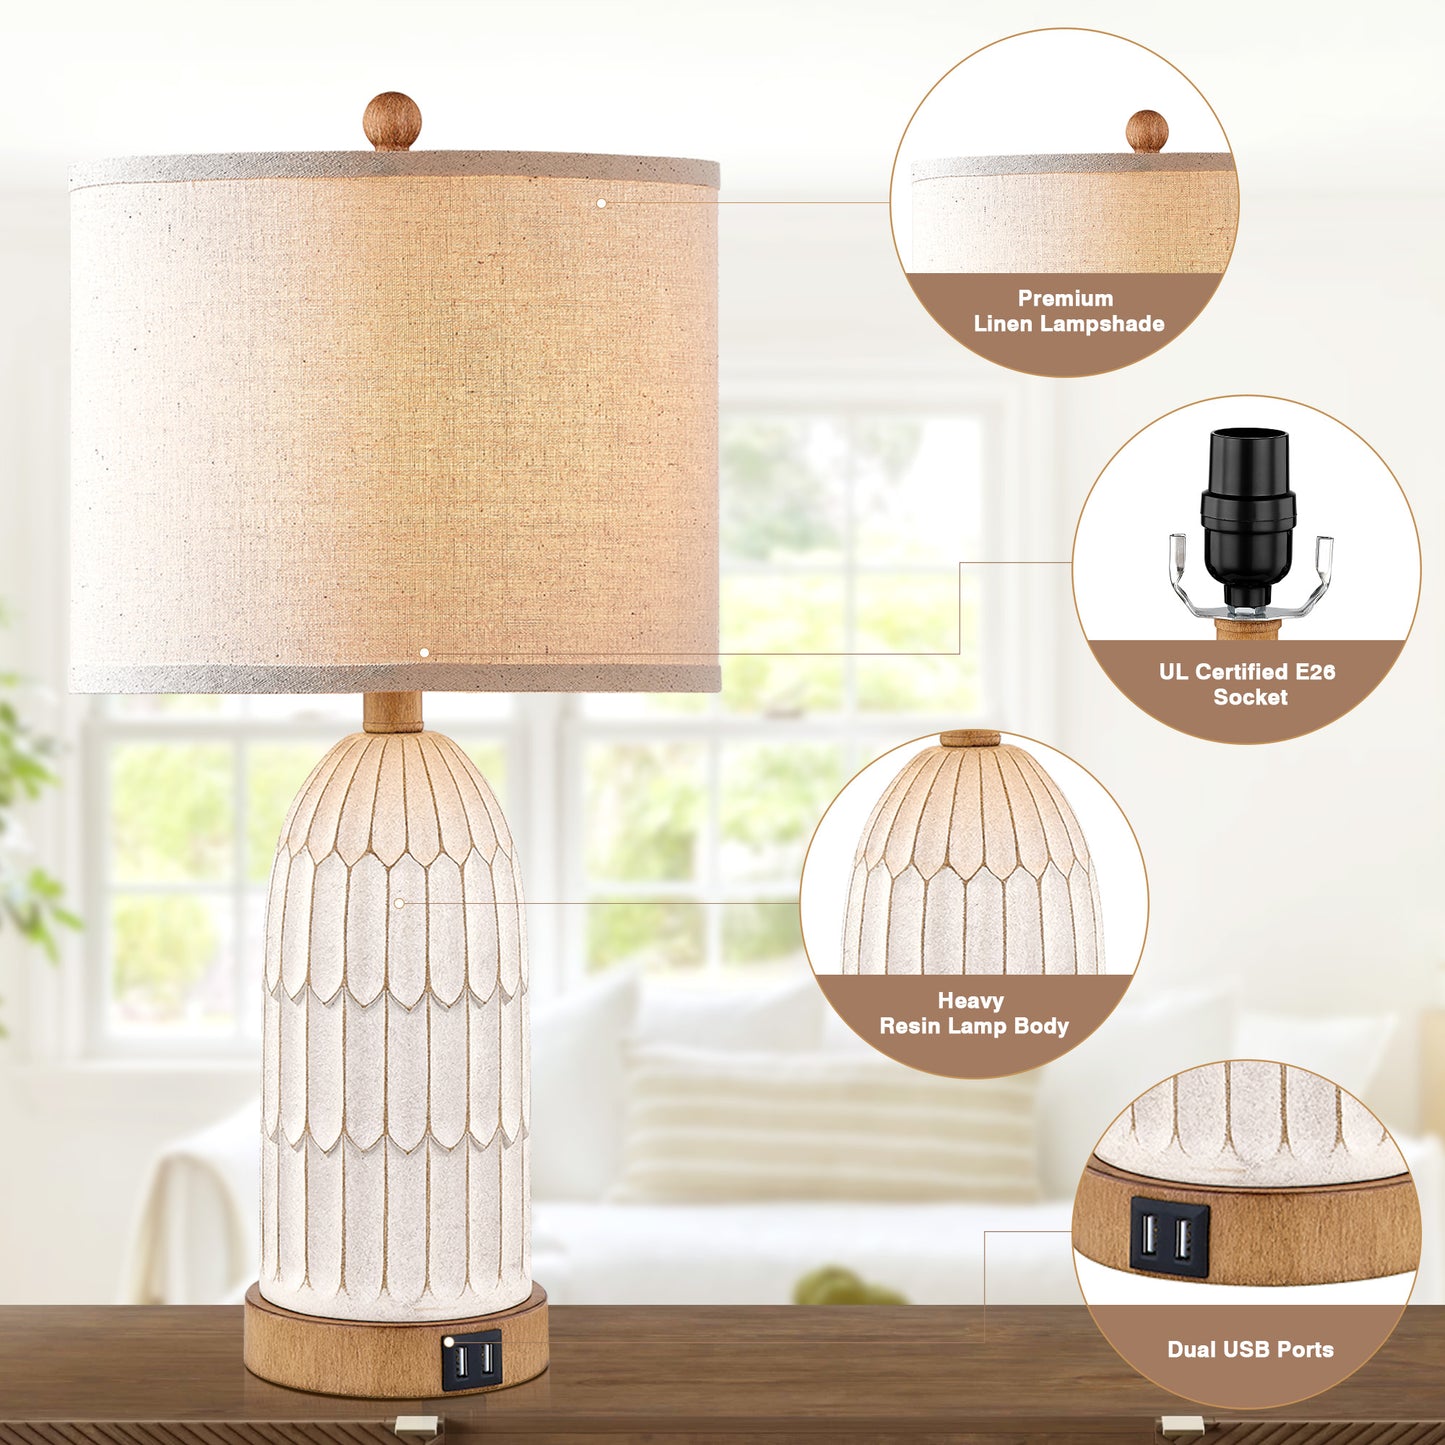 Cinkeda Resin Church Dome Style Table Lamp + USB Charging Ports + Touch Switch